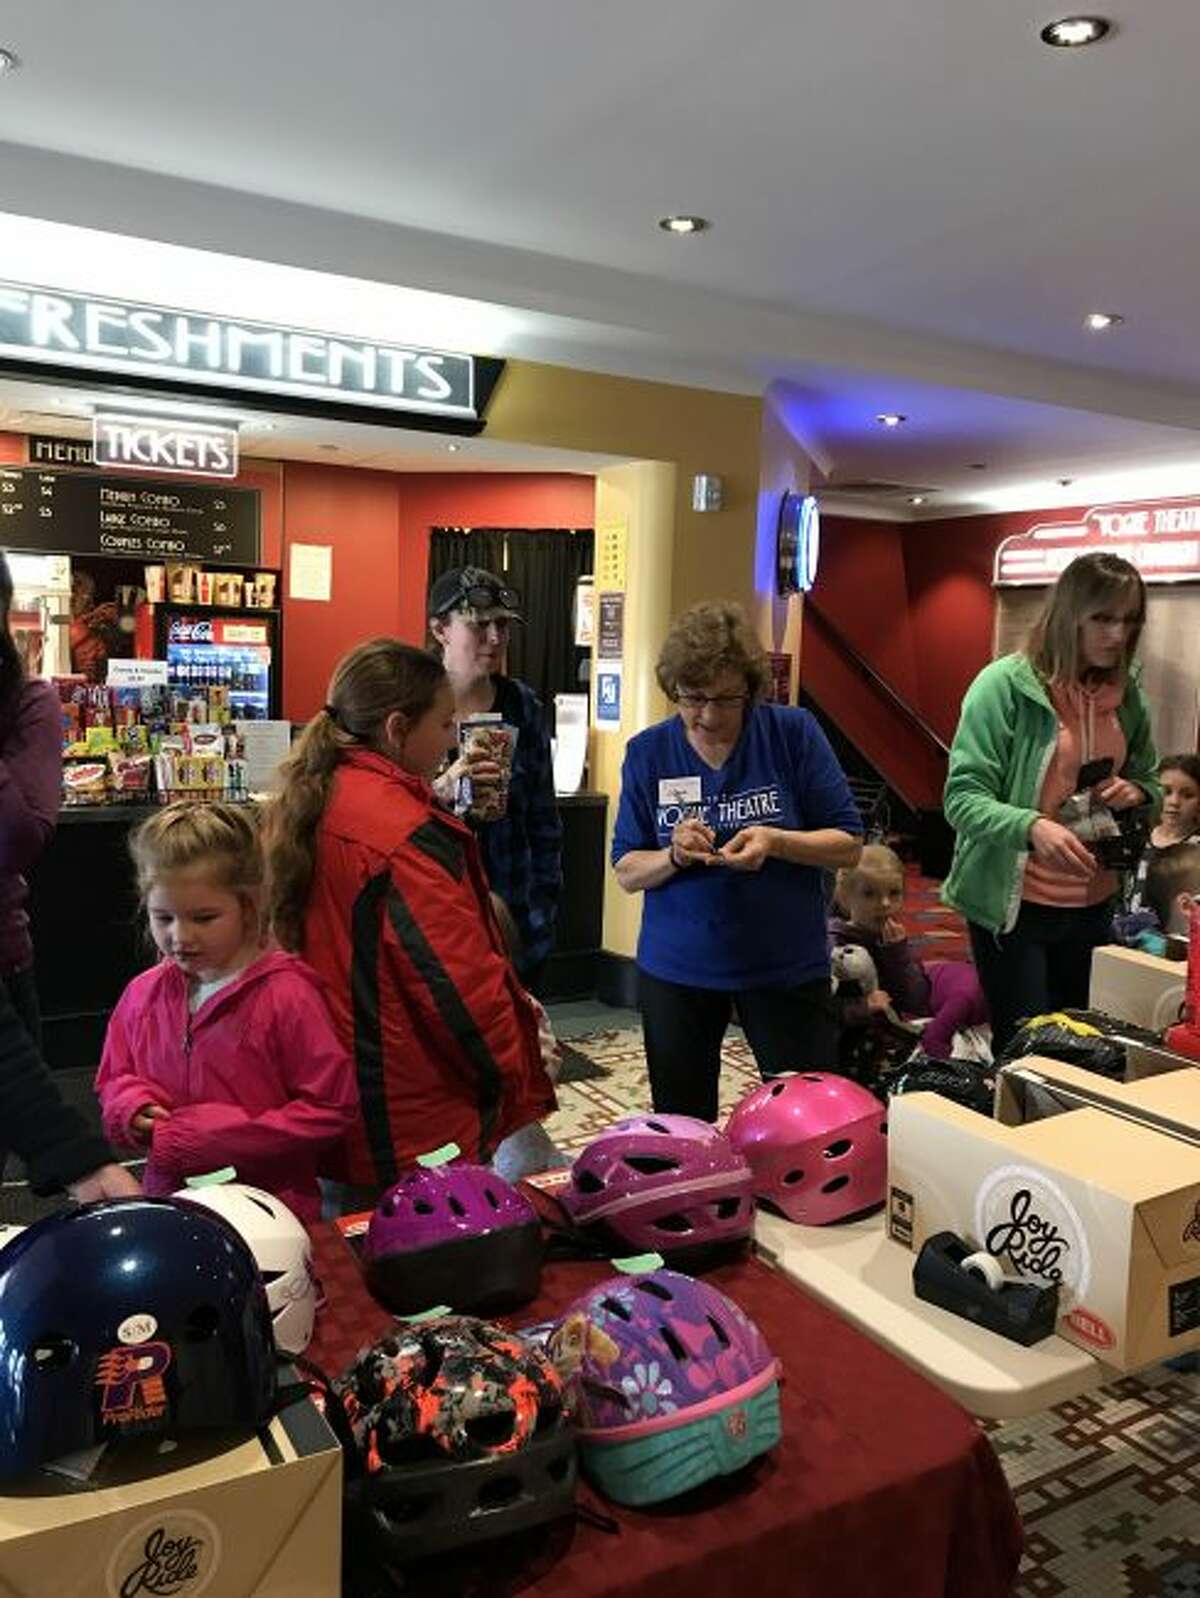 The Helmets for Kids program gave away 30 helmets at the Vogue Theatre on Saturday as part of the annual local initiative to keep children safe while riding their bicycles this summer. Organizer Clara Kahle said the program was a huge success this year.